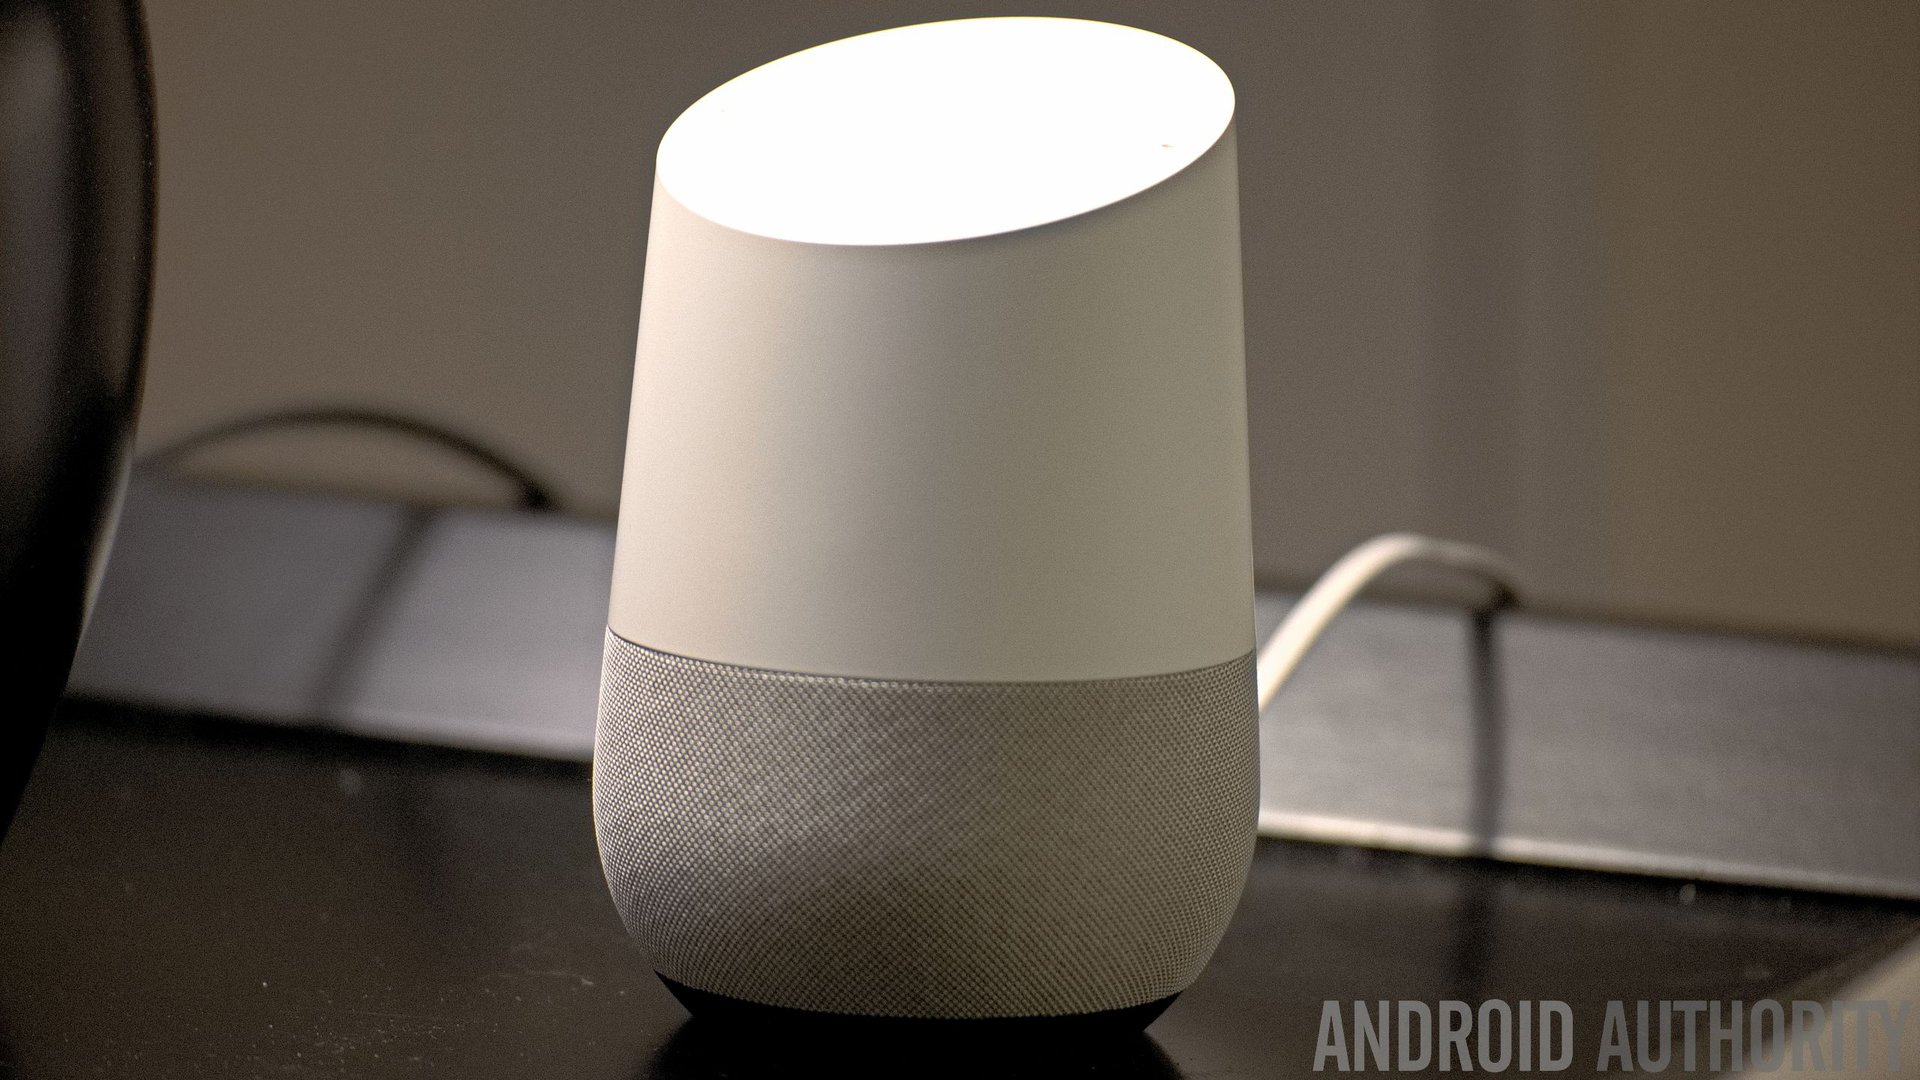 Google Home can now better control your smart home appliances